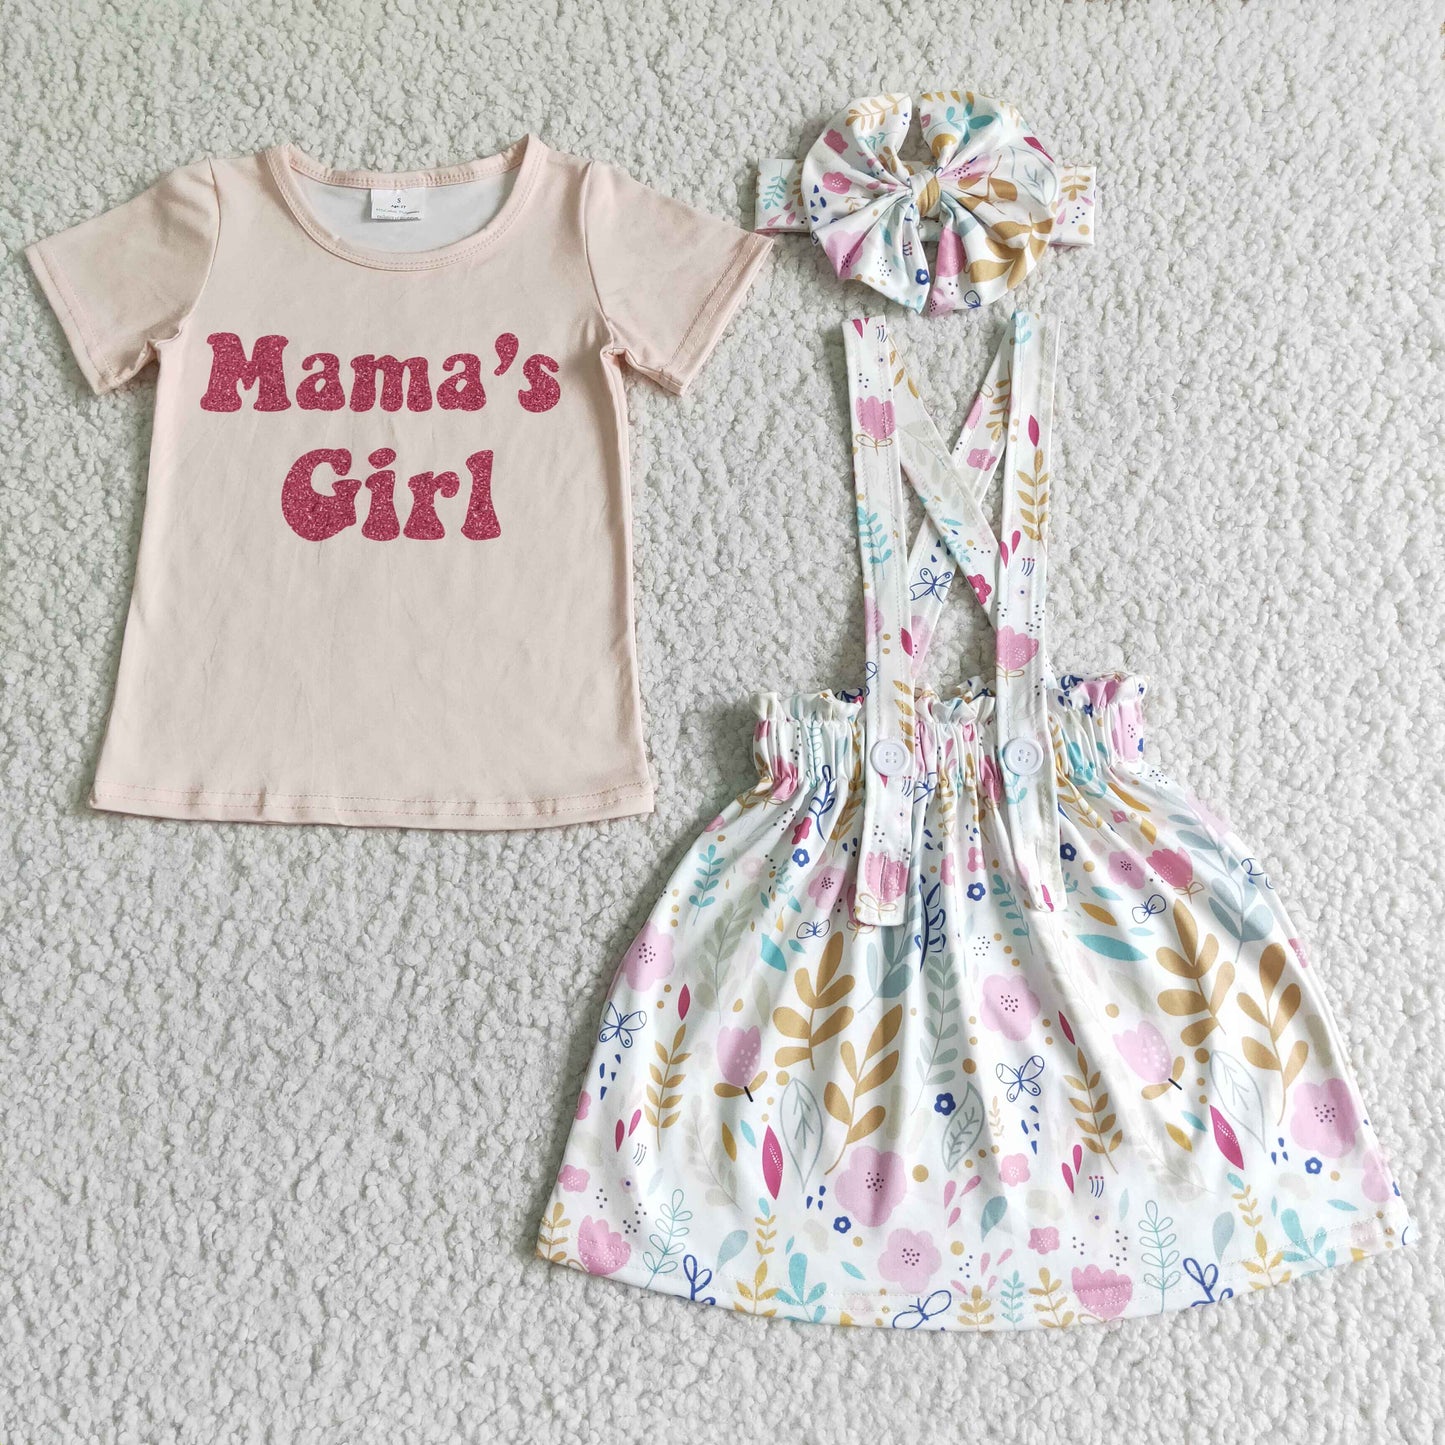 Mama's girl suspender floral skirt kids girls outfits